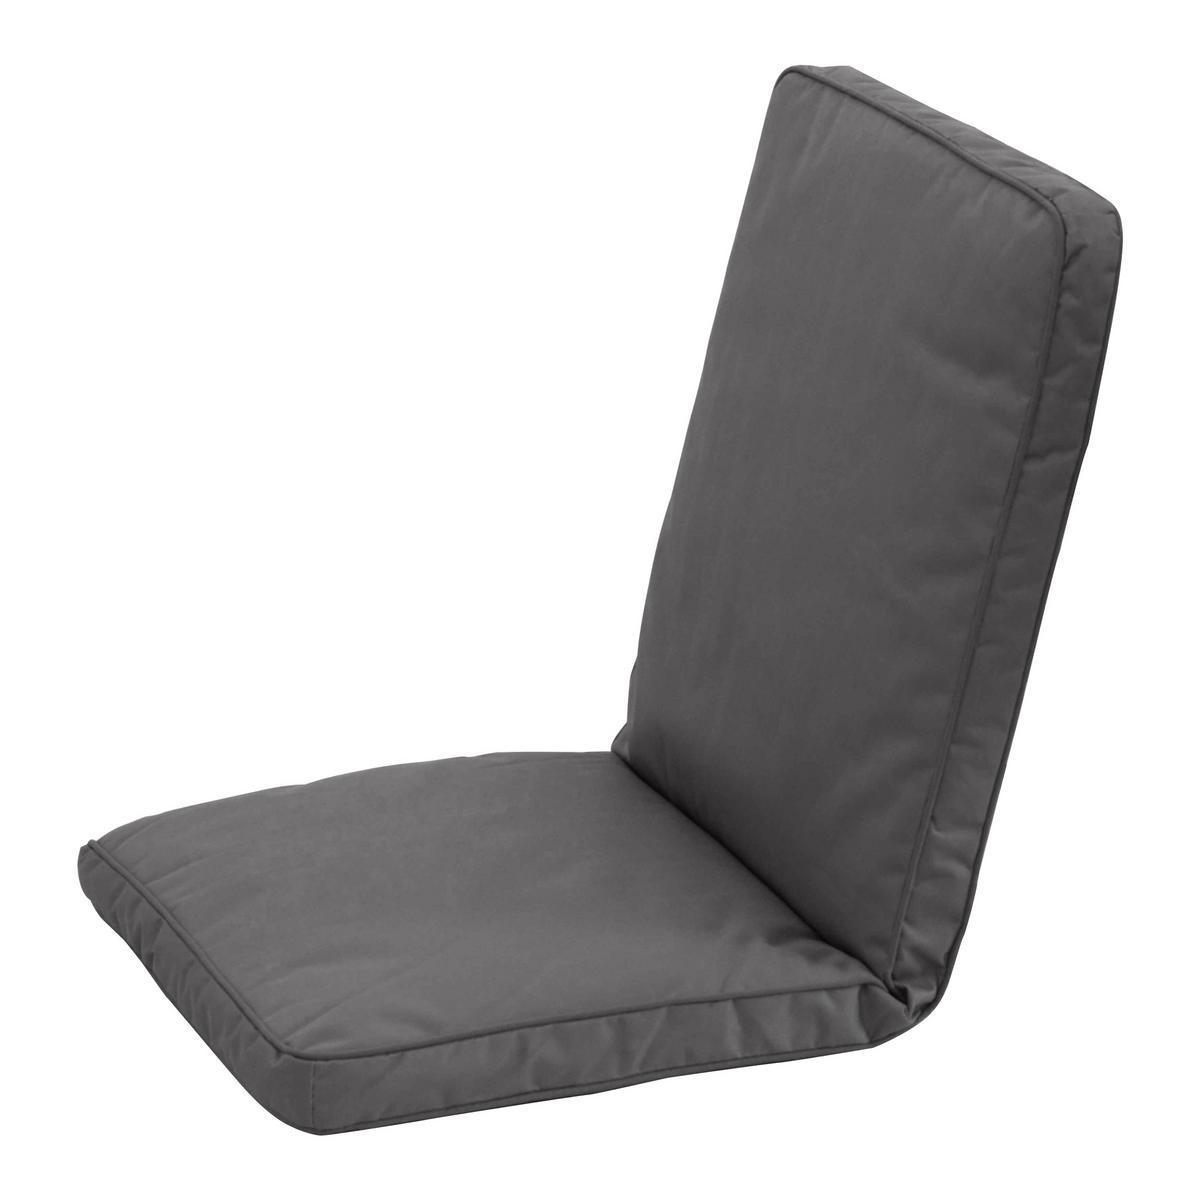 Coussin de chaise - Polyester - 90 x 40 x 4 cm - Anthracite